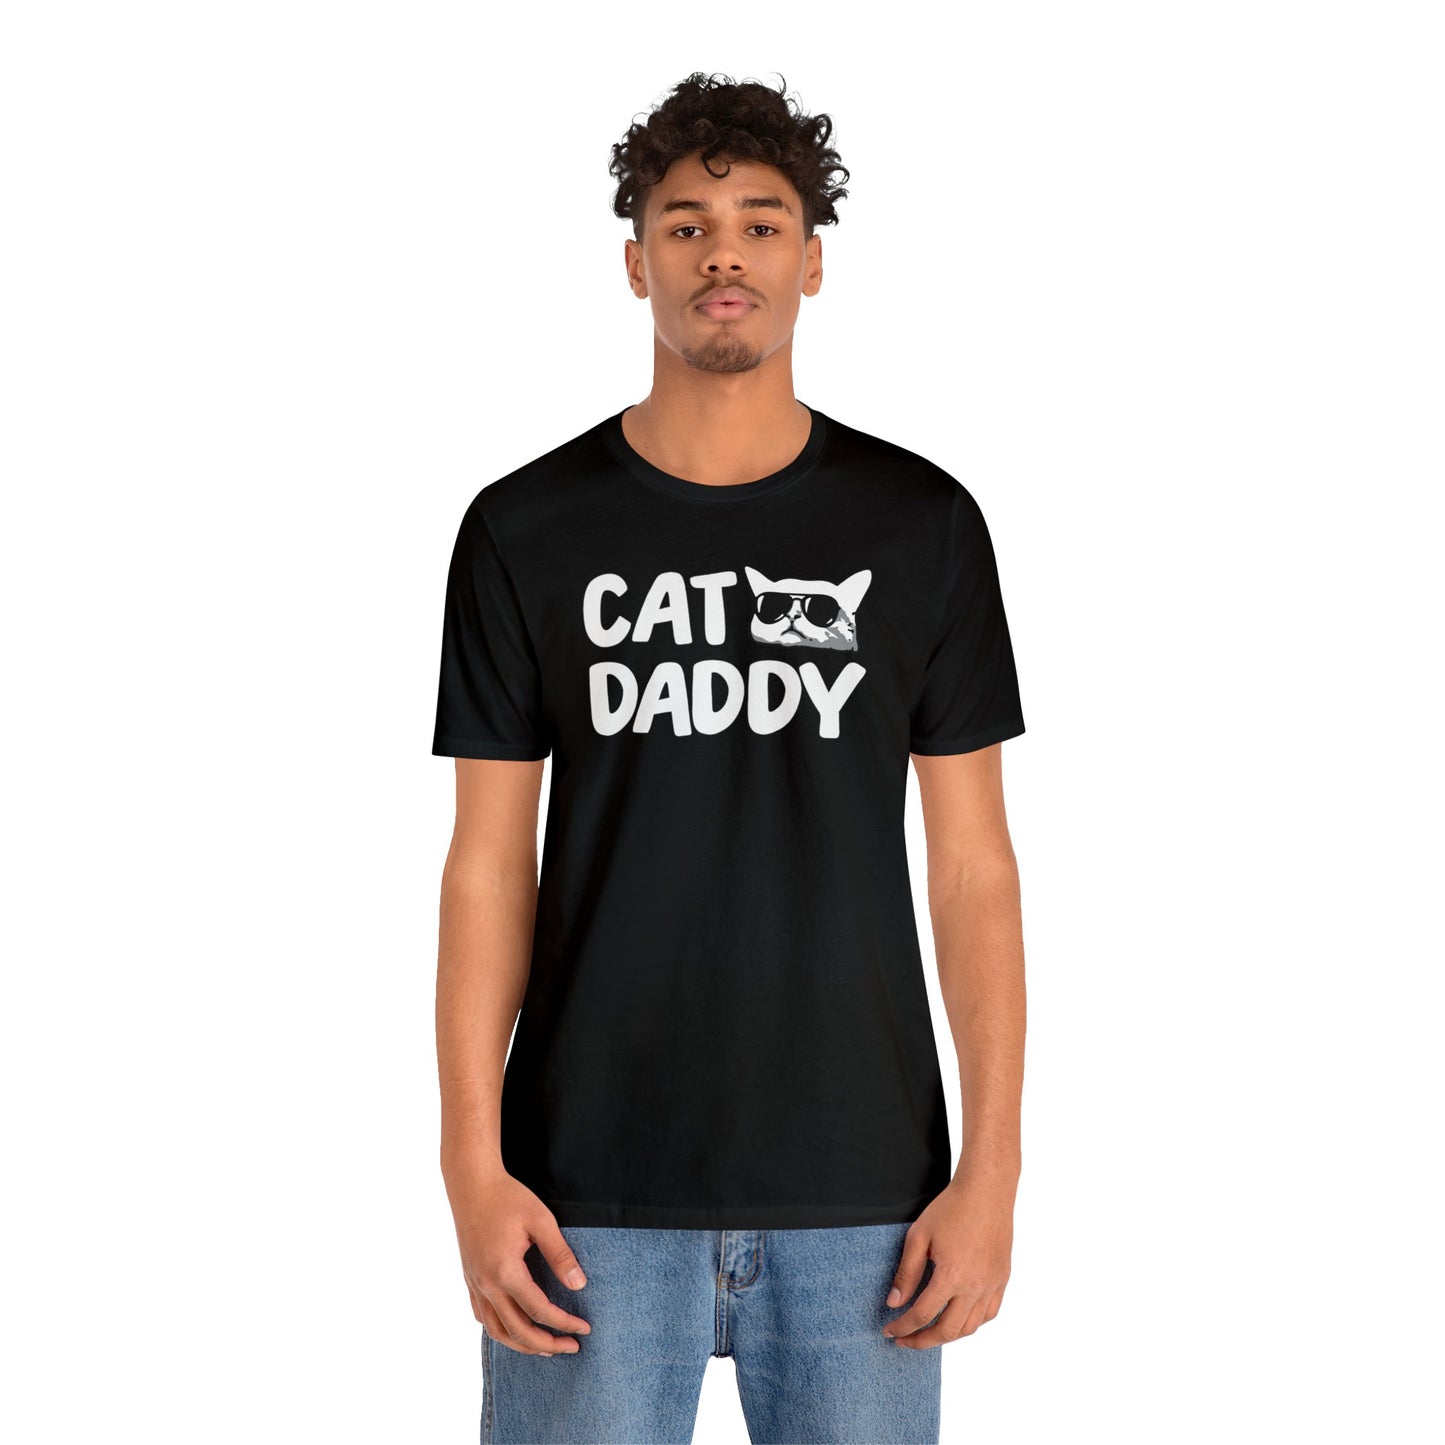 Cat Daddy - Wicked Naughty Apparel